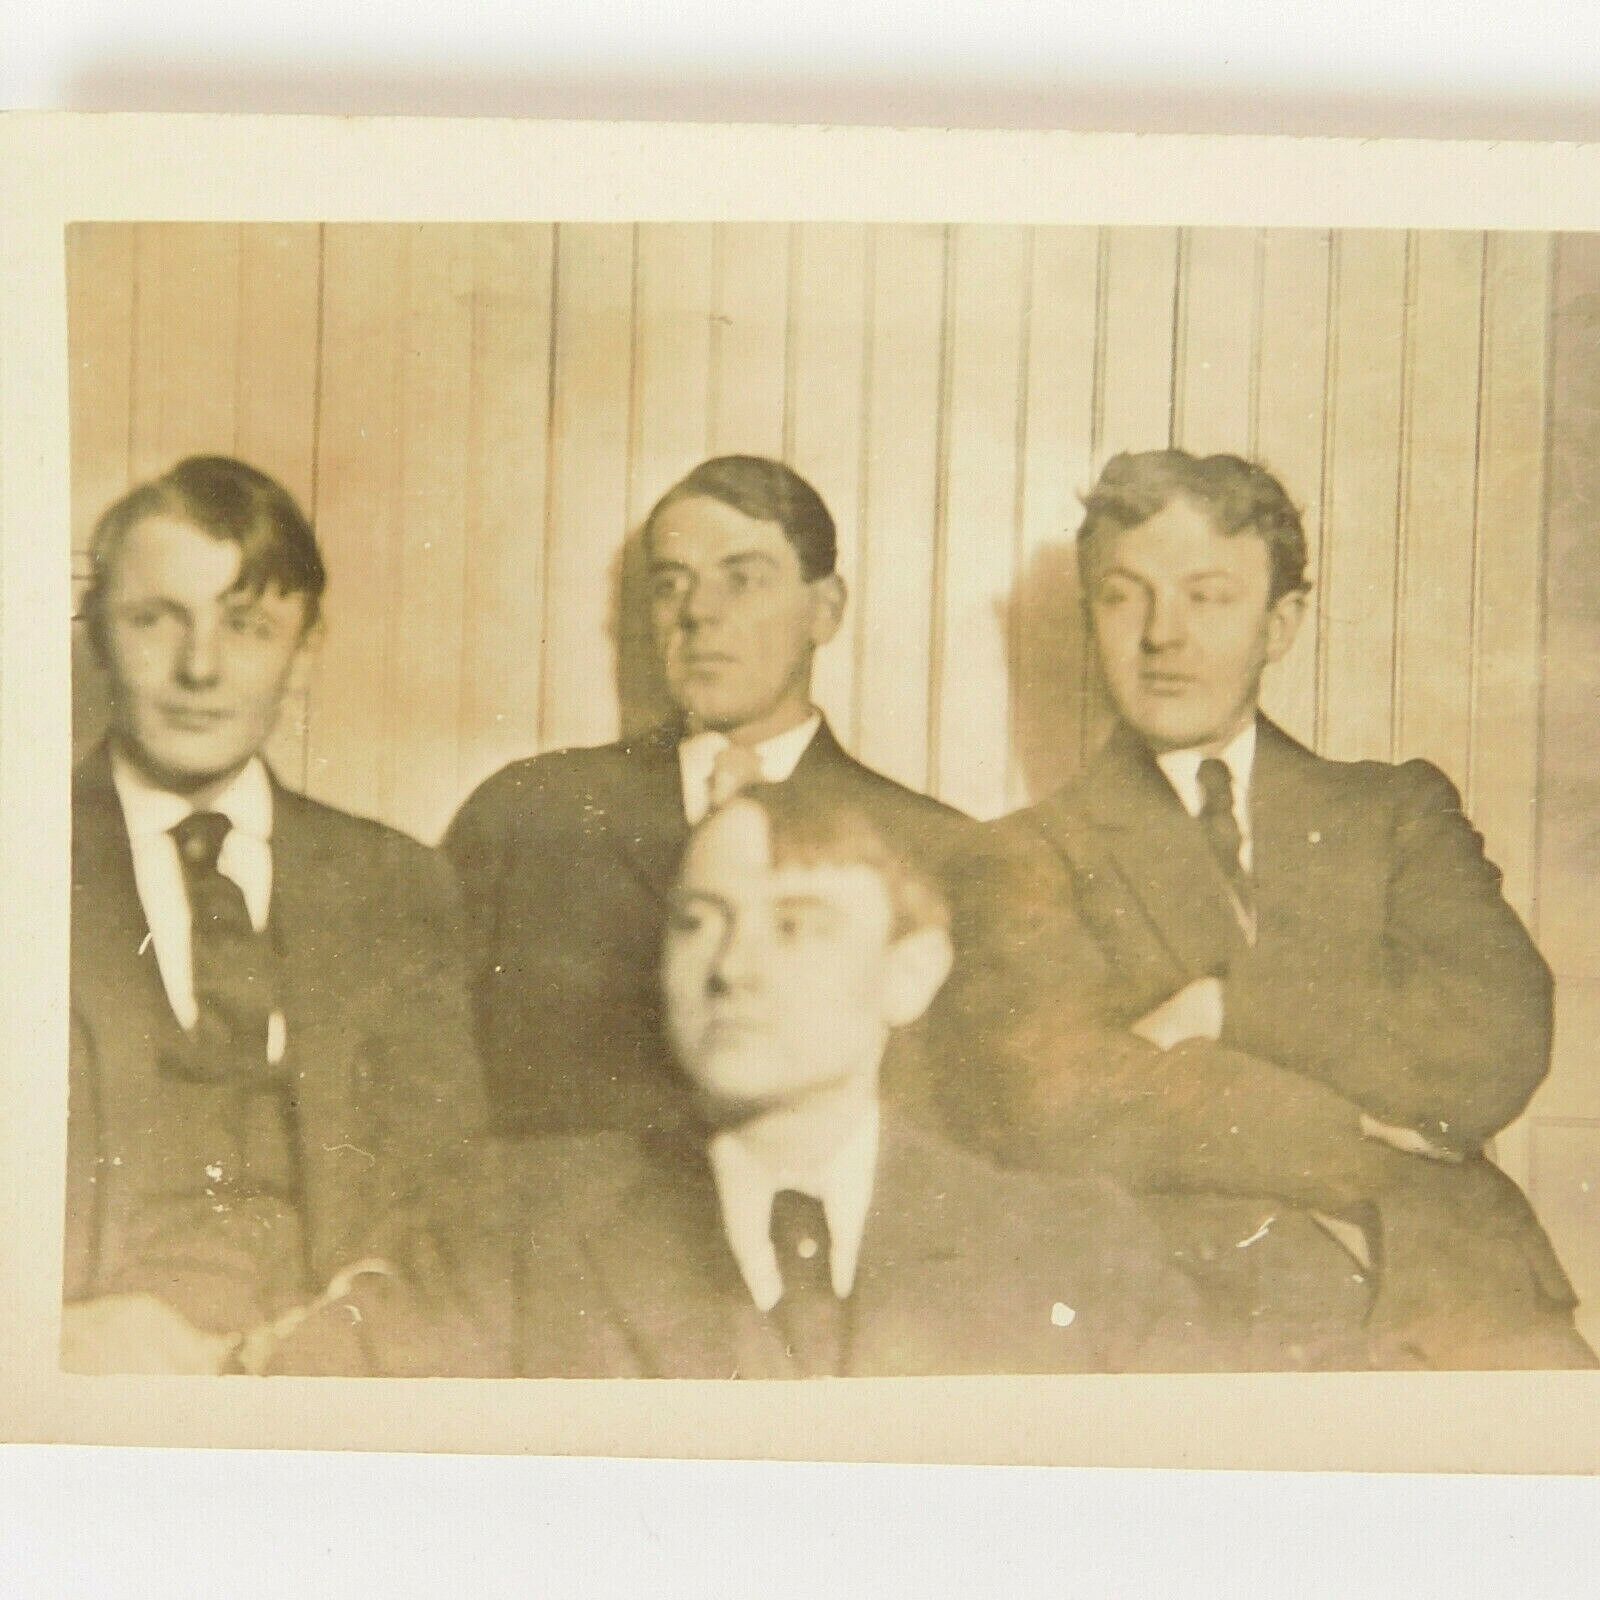 Vintage RPPC Postcard Four Men in Suits at Meeting or Event c.early 1900's